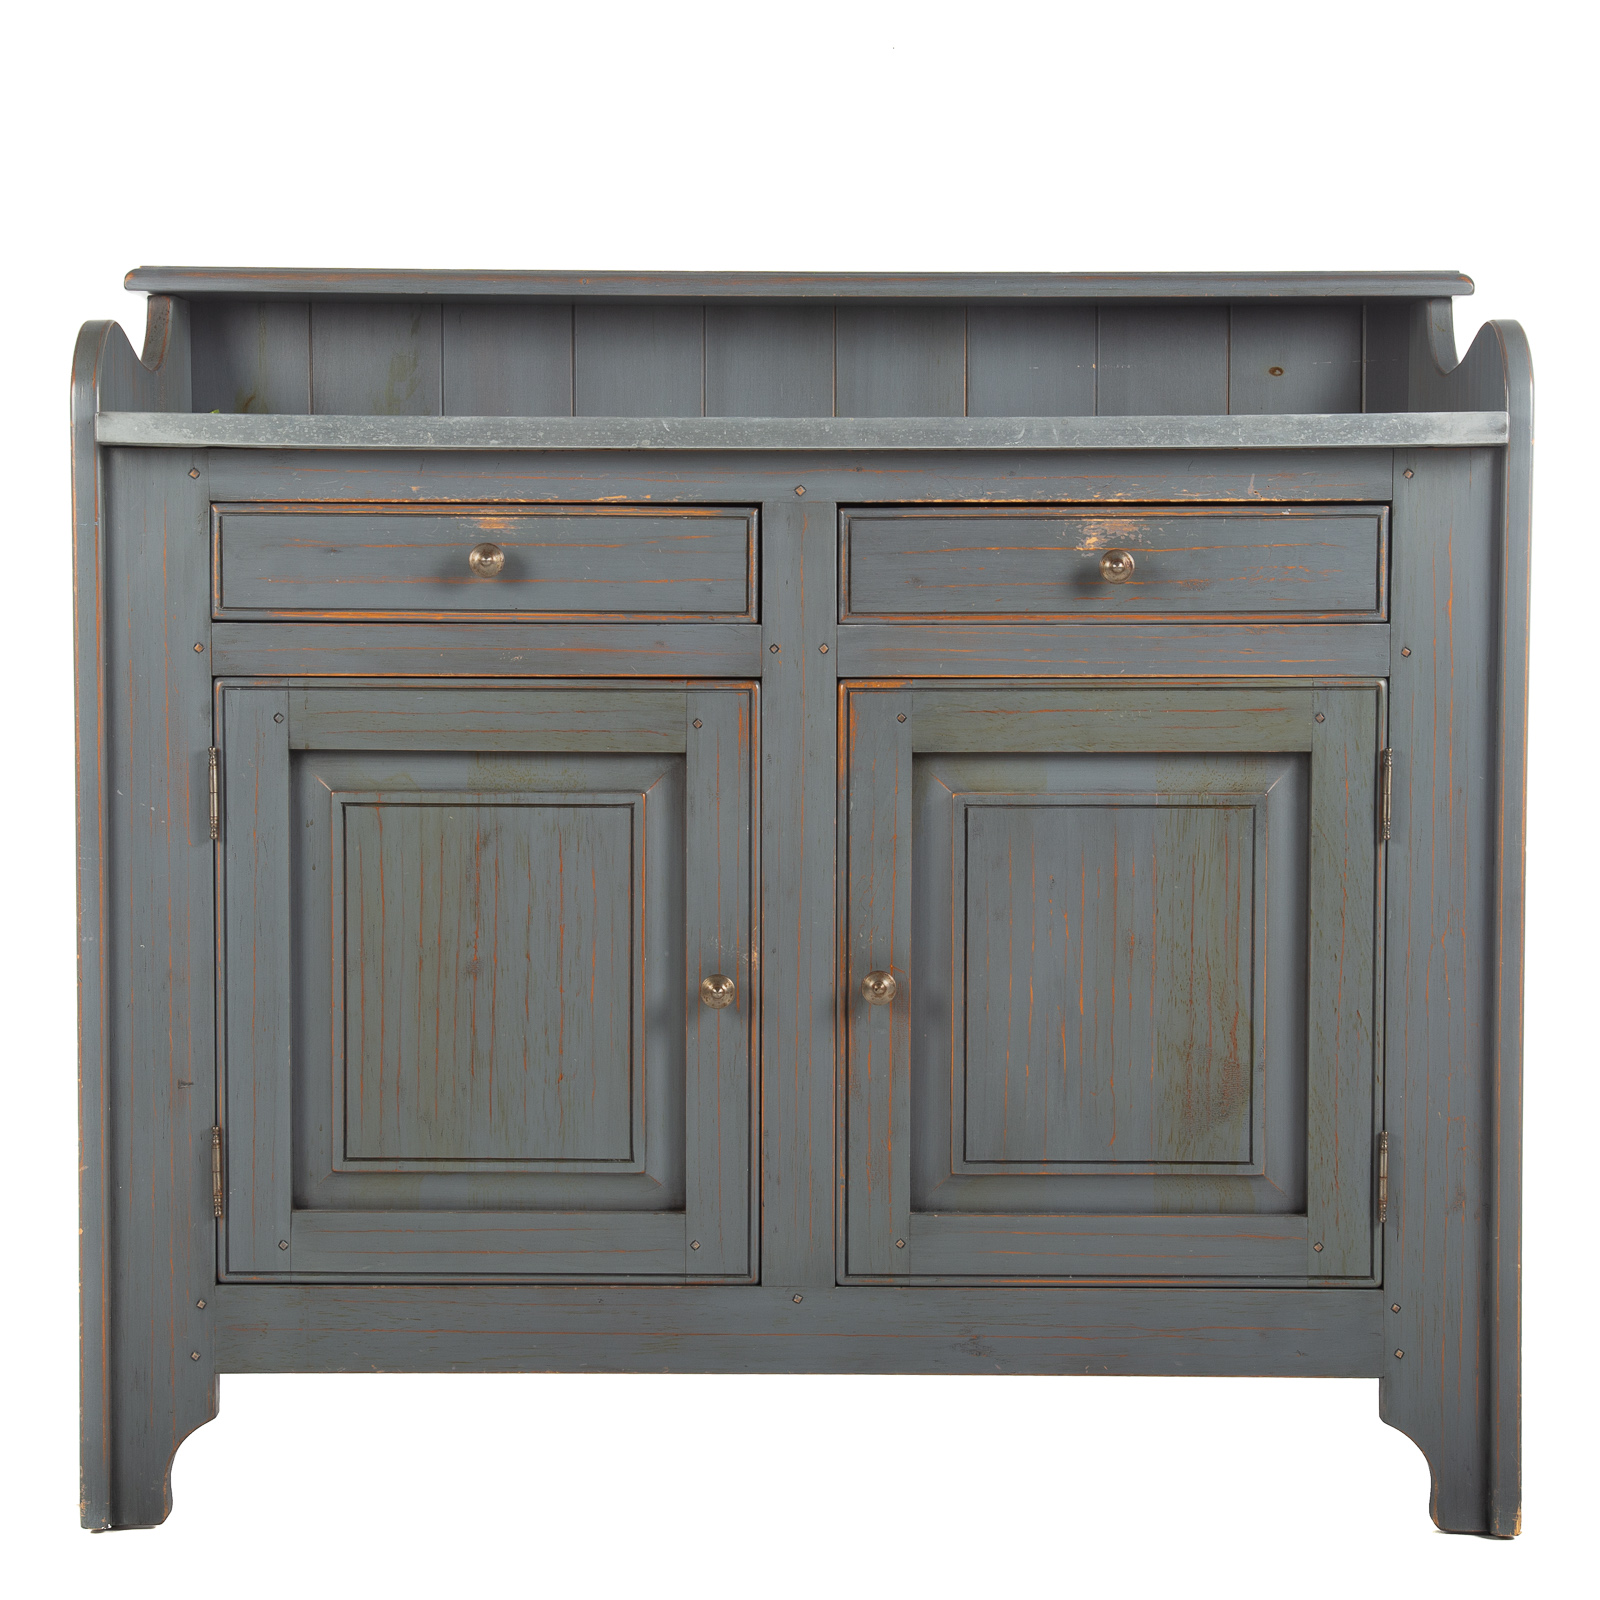 RUSTIC STYLE PAINTED WOOD BUFFET 36a897